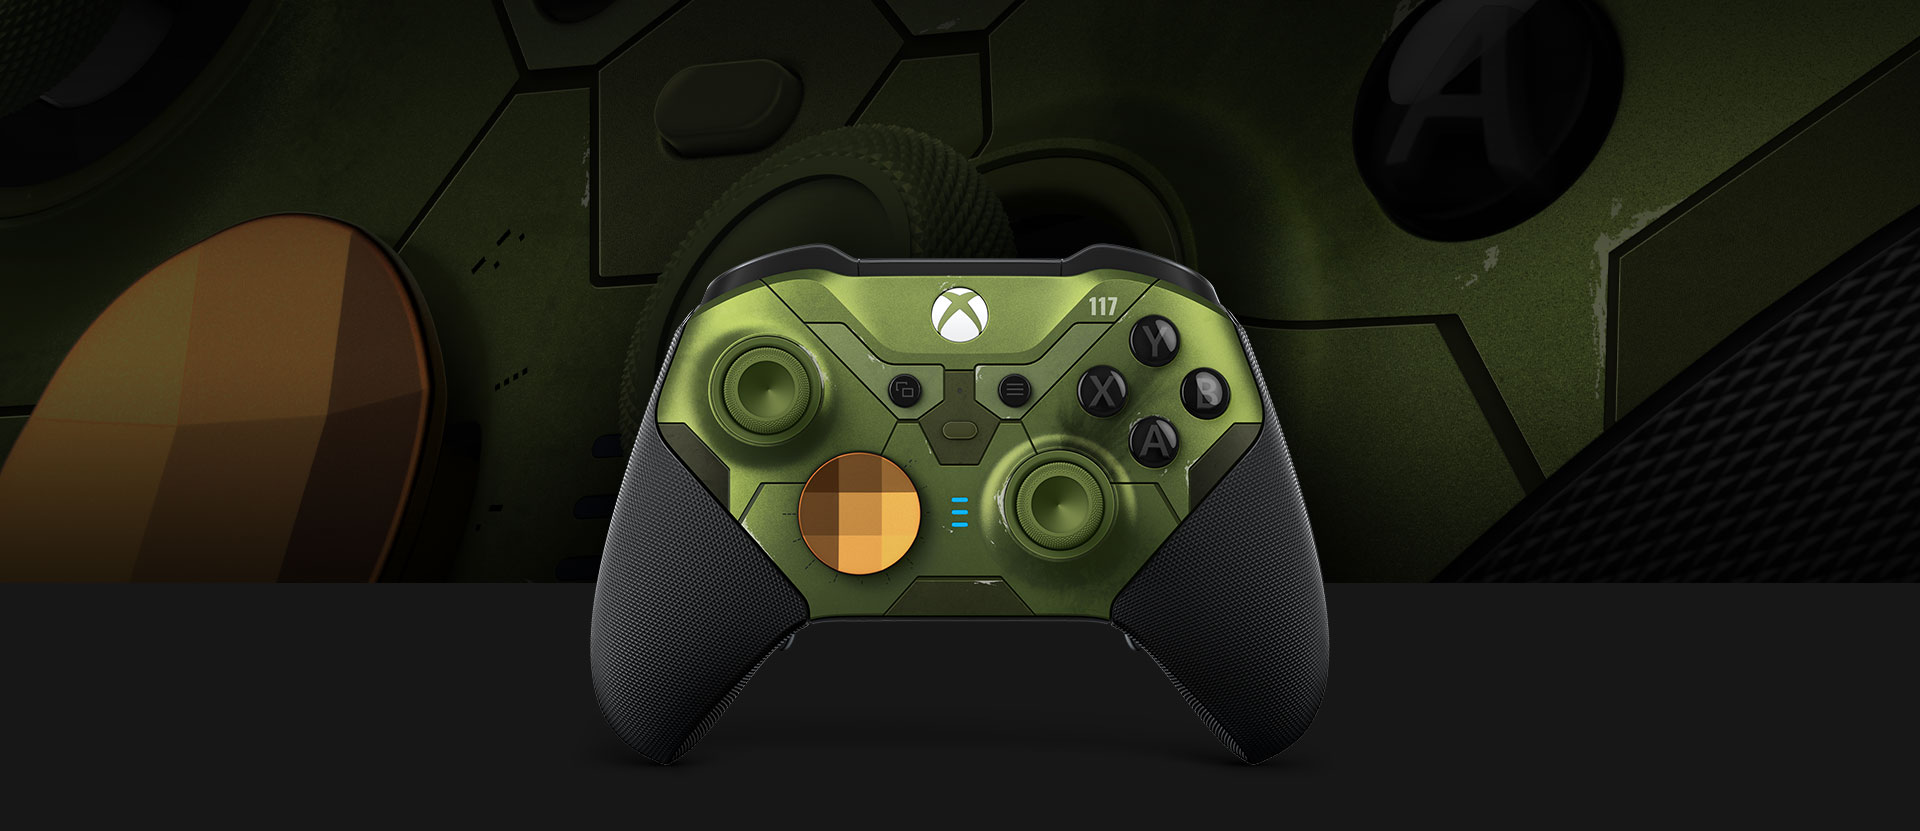 Front view of the Xbox Elite Wireless controller series 2 Halo Infinite Limited Edition with a close-up of the controller in the background